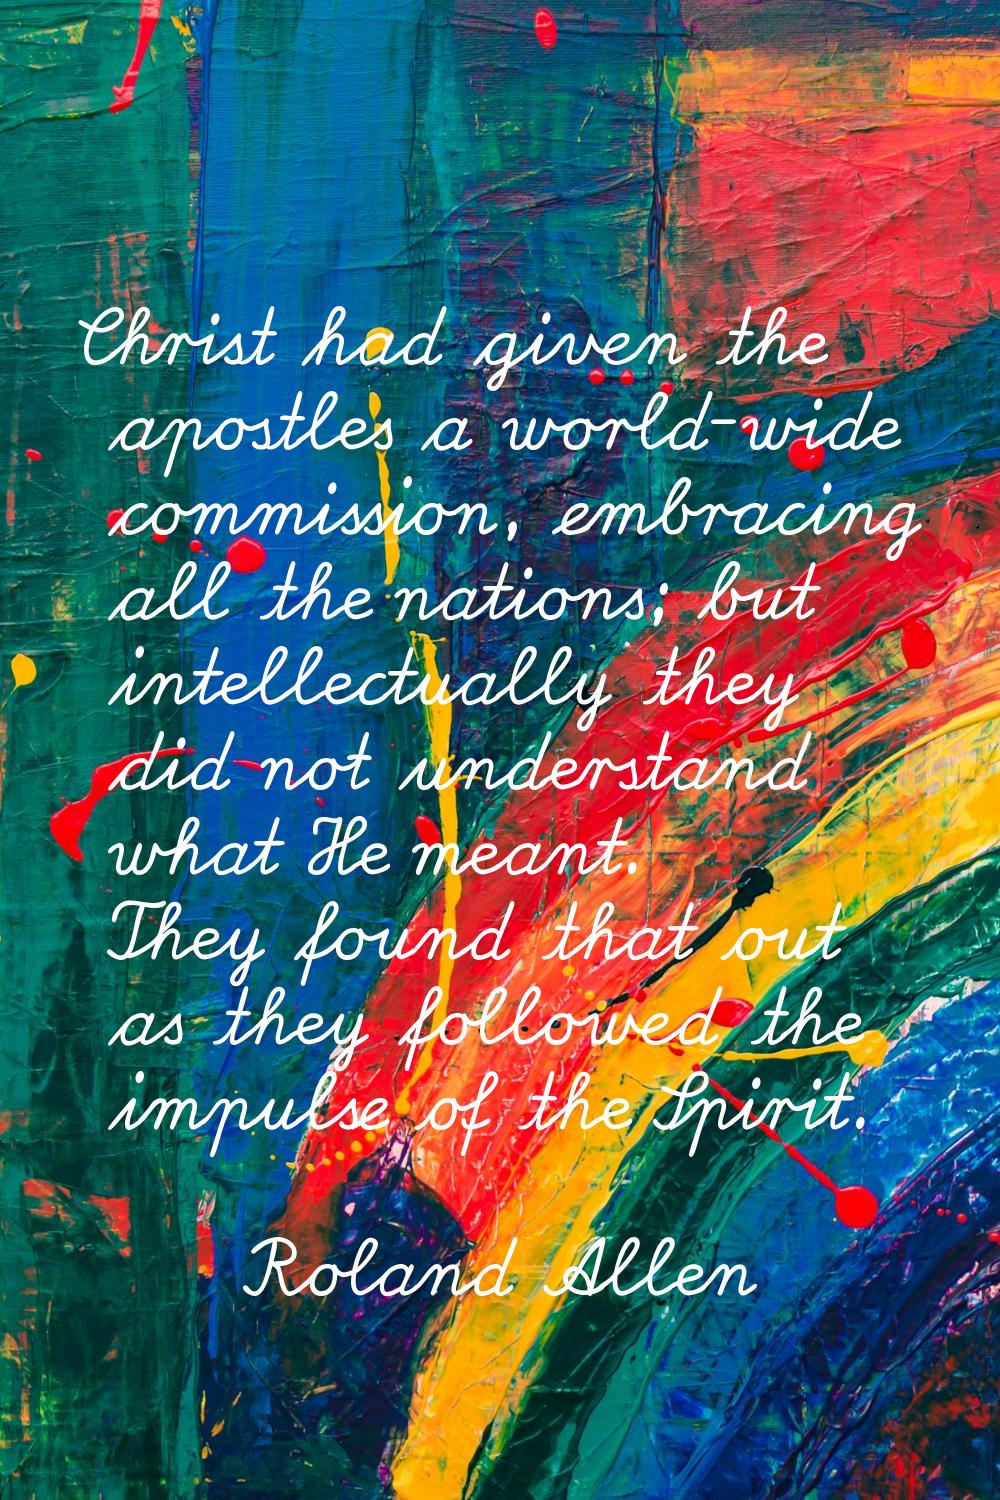 Christ had given the apostles a world-wide commission, embracing all the nations; but intellectuall